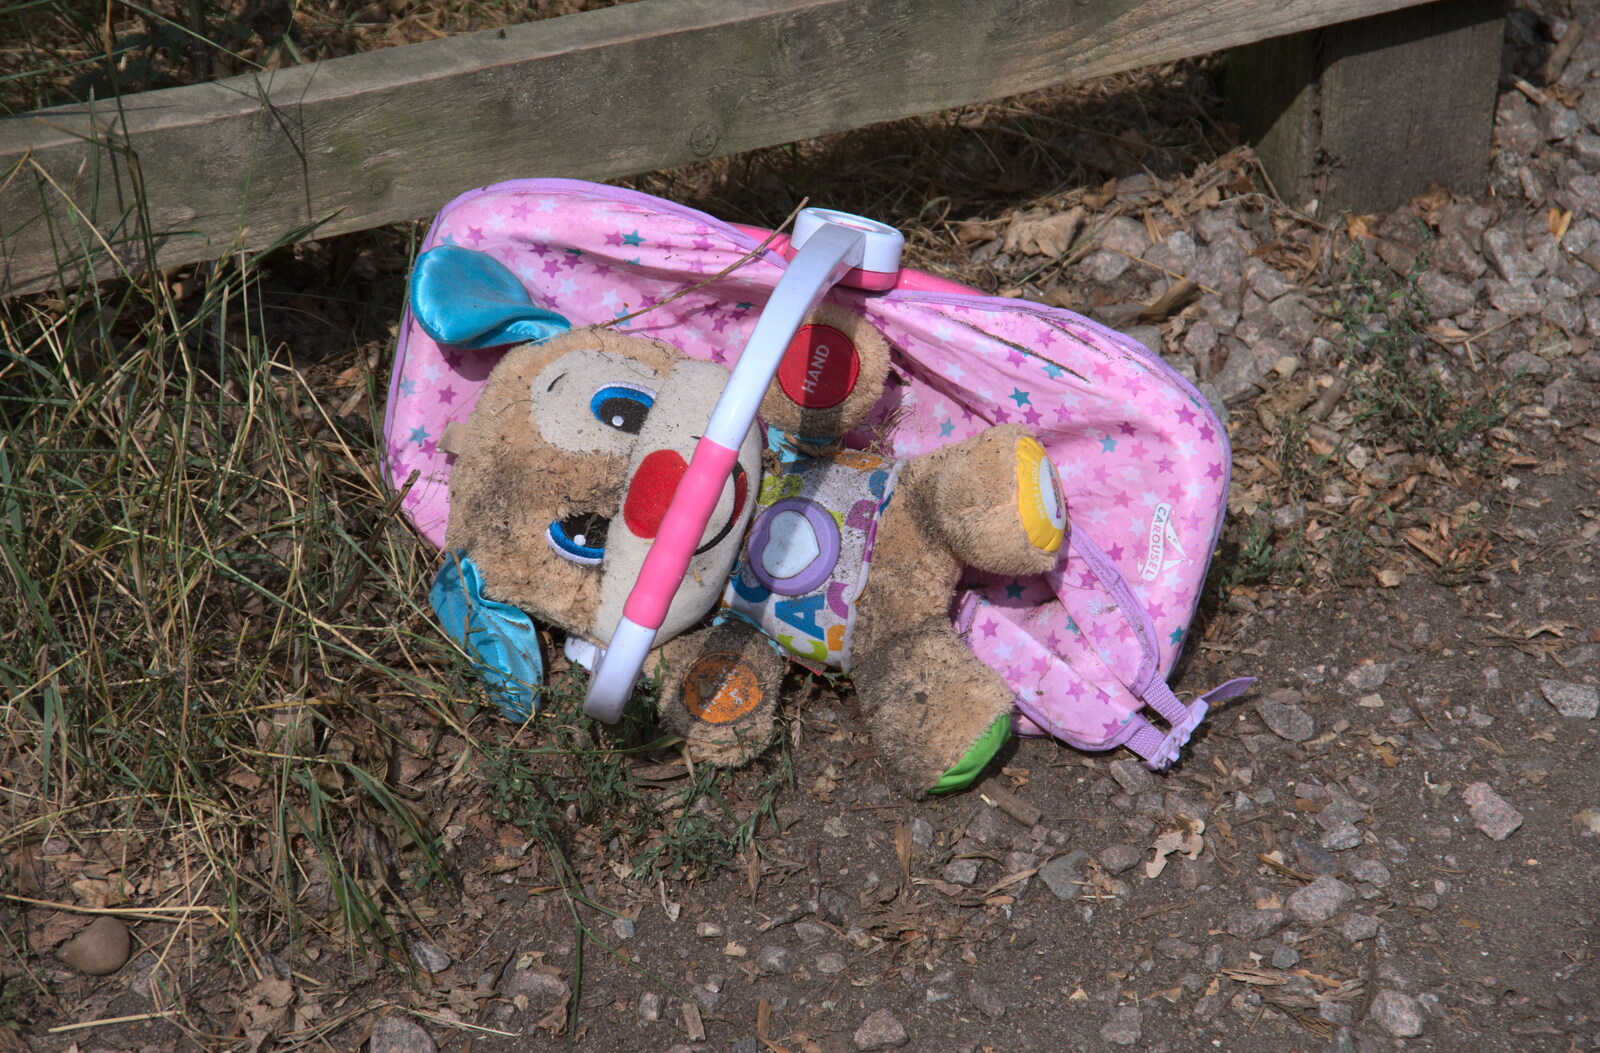 A discarded favourite bear by the cark park gate from Jules Visits, and a Trip to Tyrrel's Wood, Pulham Market, Norfolk - 16th August 2020